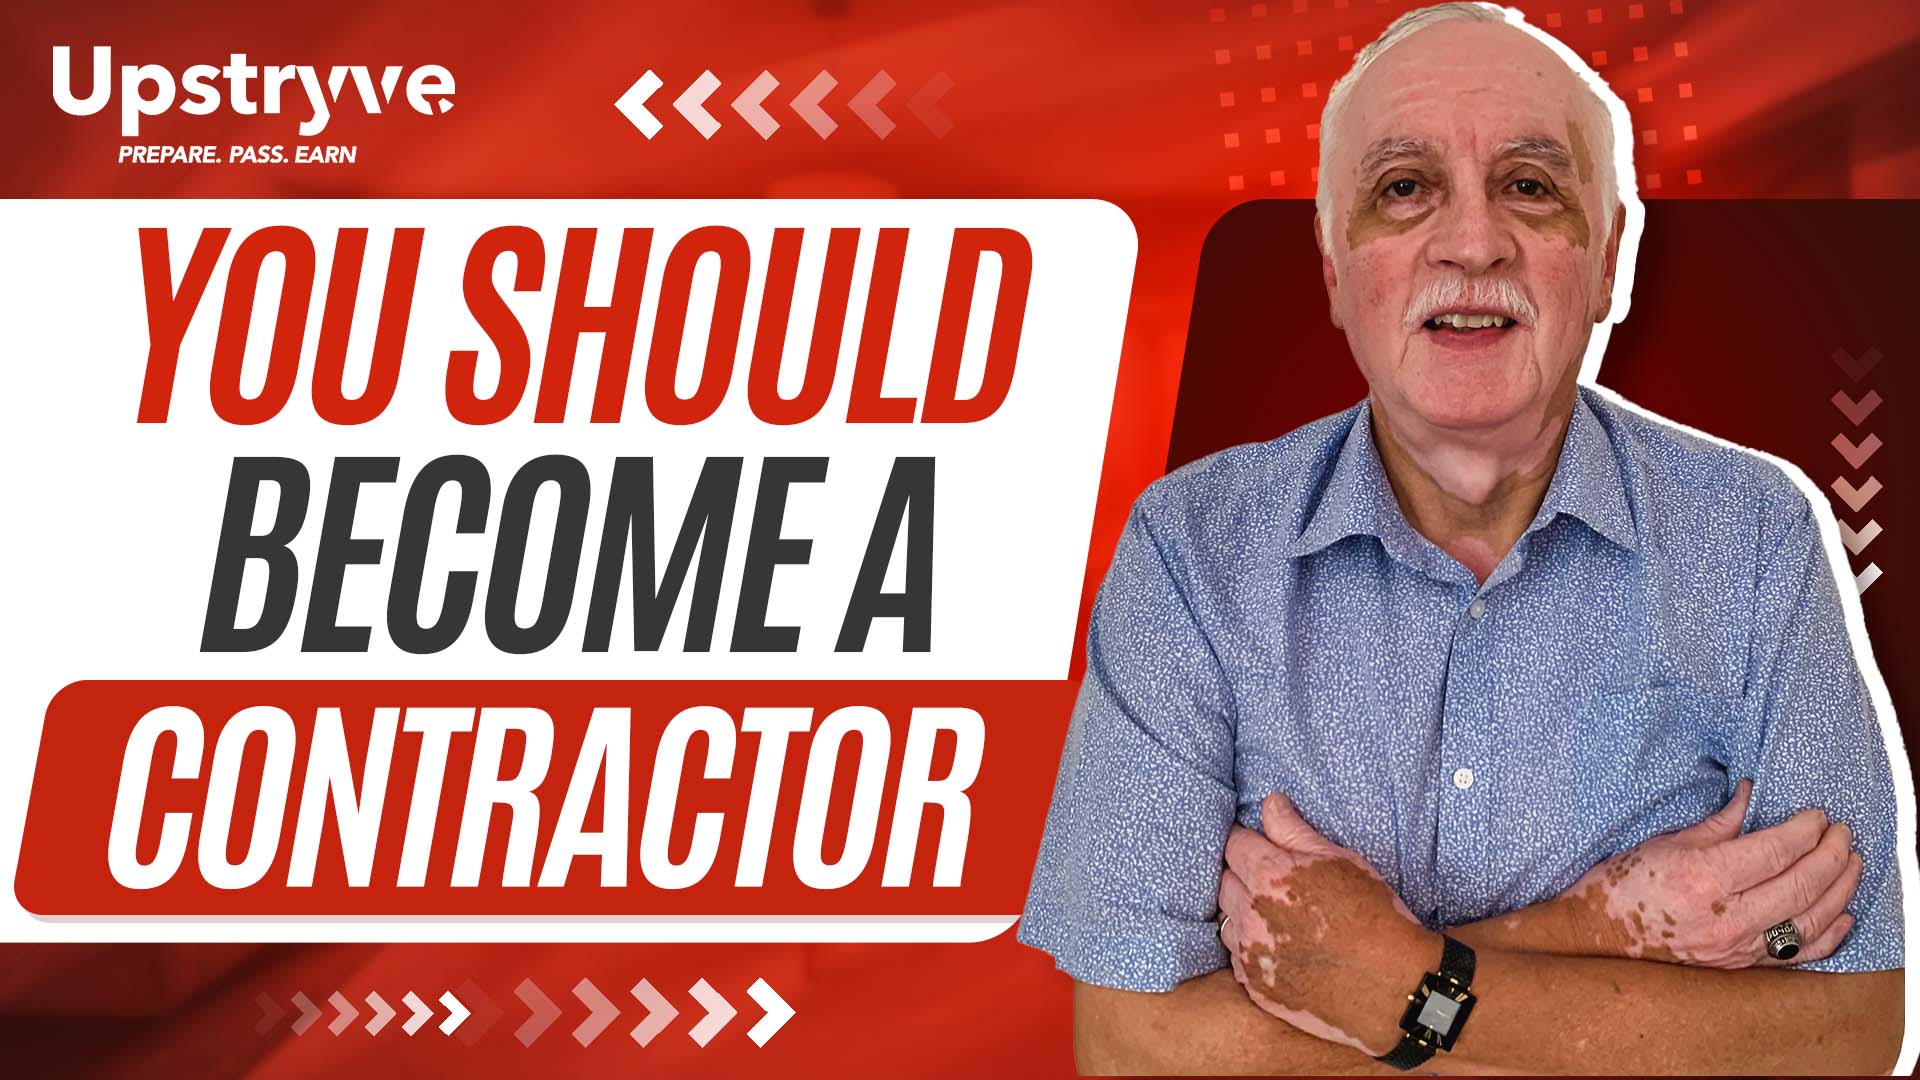 There are many benefits of having a Contractors license. You get more opportunities, your pay increases, jobs can become larger and more interesting and you get all the benefits of being a company owner. In today's video, Hugo goes over another little know or talked-about benefit of getting your Contractors license. Watch the entire video and find out how having your Contractors license can dramatically improve your life. Comment below with what you believe are benefits to having a Contractors license. 

If you are in the process of getting your Contractors license make sure to contact us at 561-229-1418 so we can guide you and help you pass your exams on your first attempt.